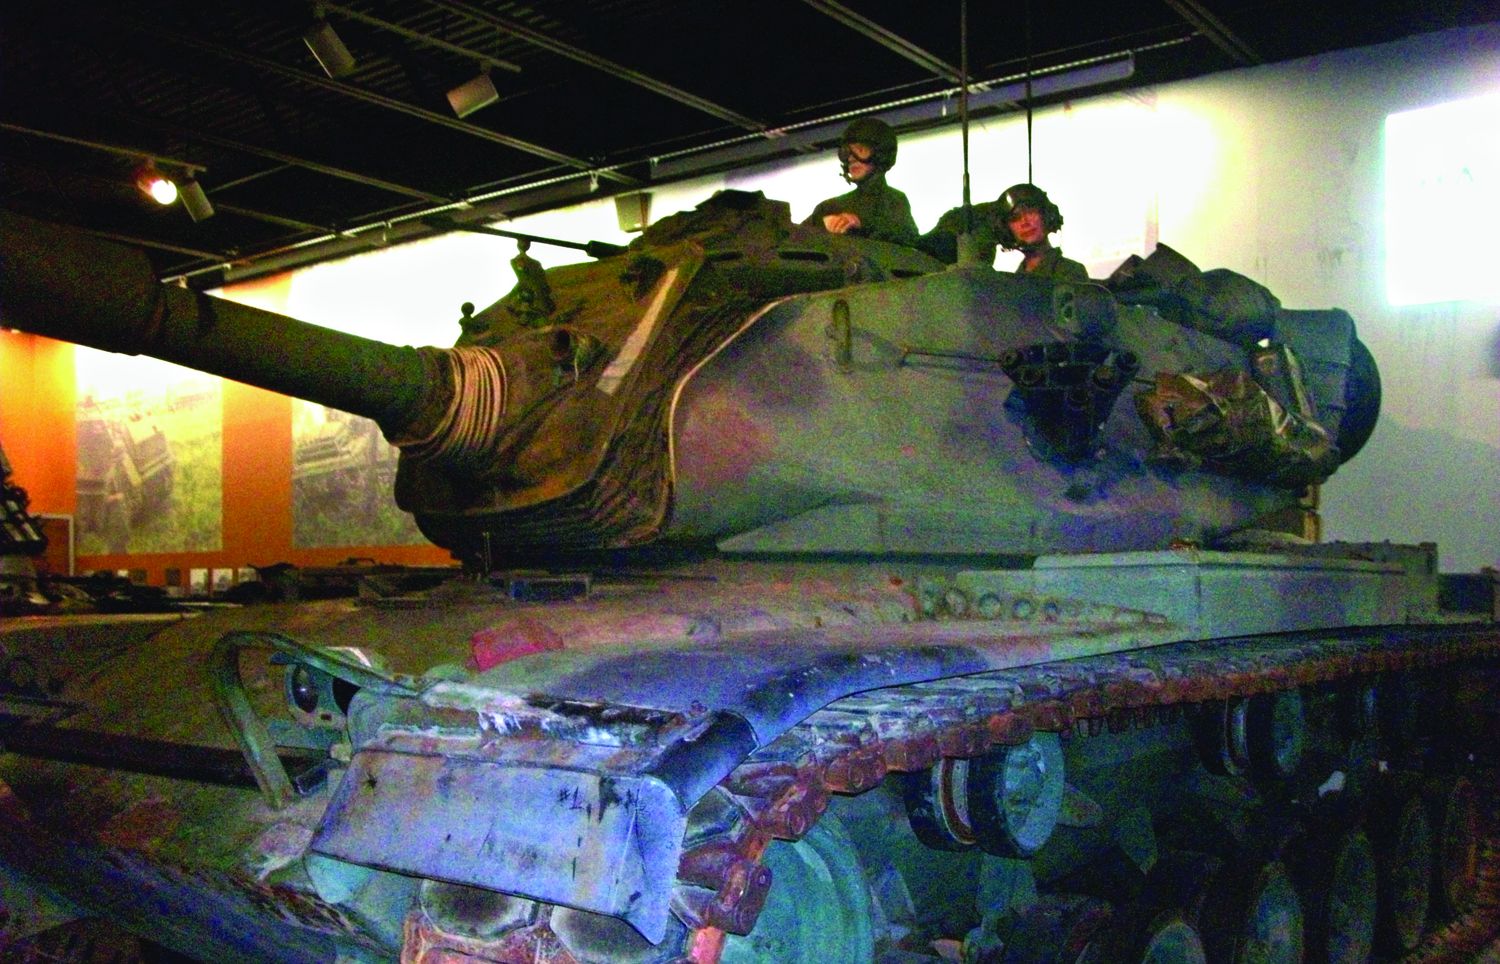 The M-48 Patton tank was used by the Army and the Marine Corps in Vietnam. It was also the Army's main battle tank in Europe during the Cold War. 